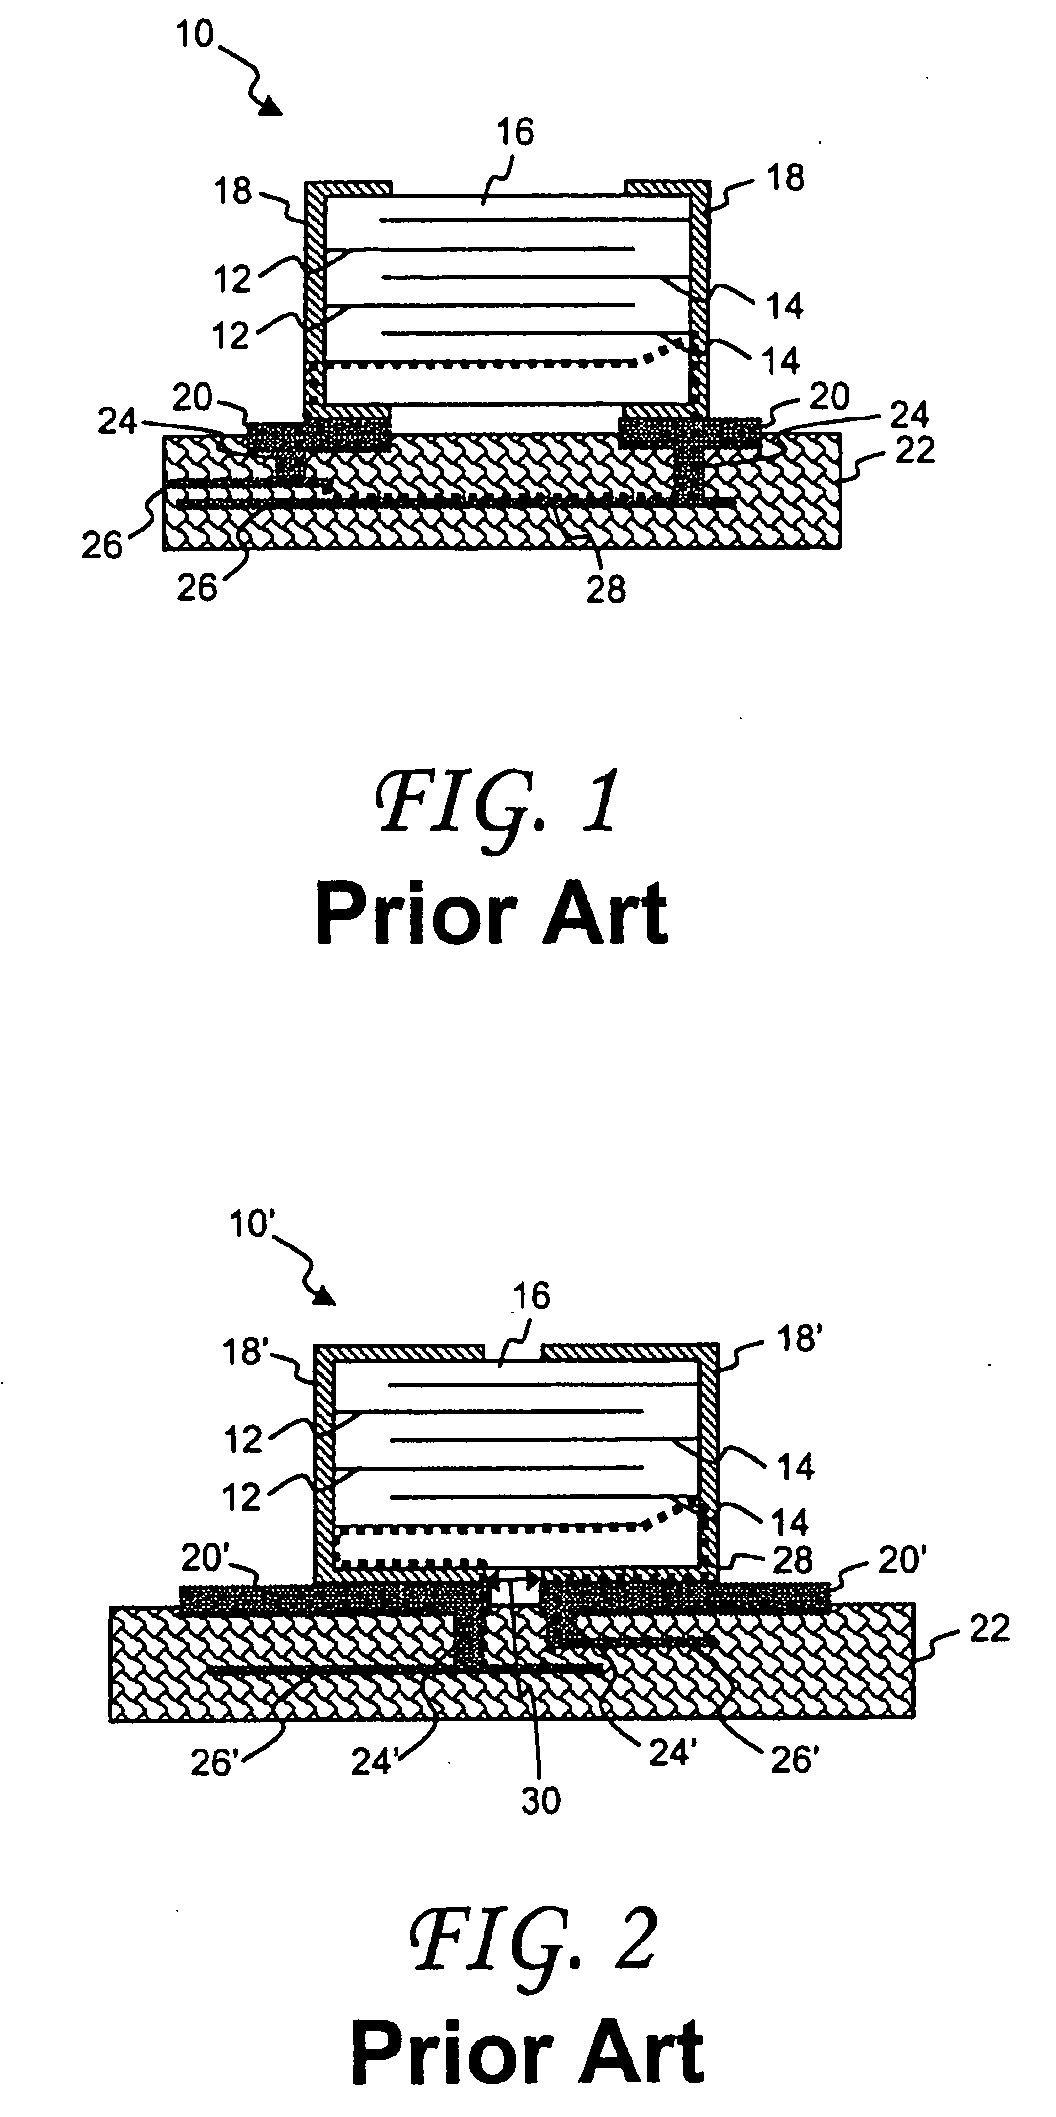 Multilayer ceramic capacitor with internal current cancellation and bottom terminals